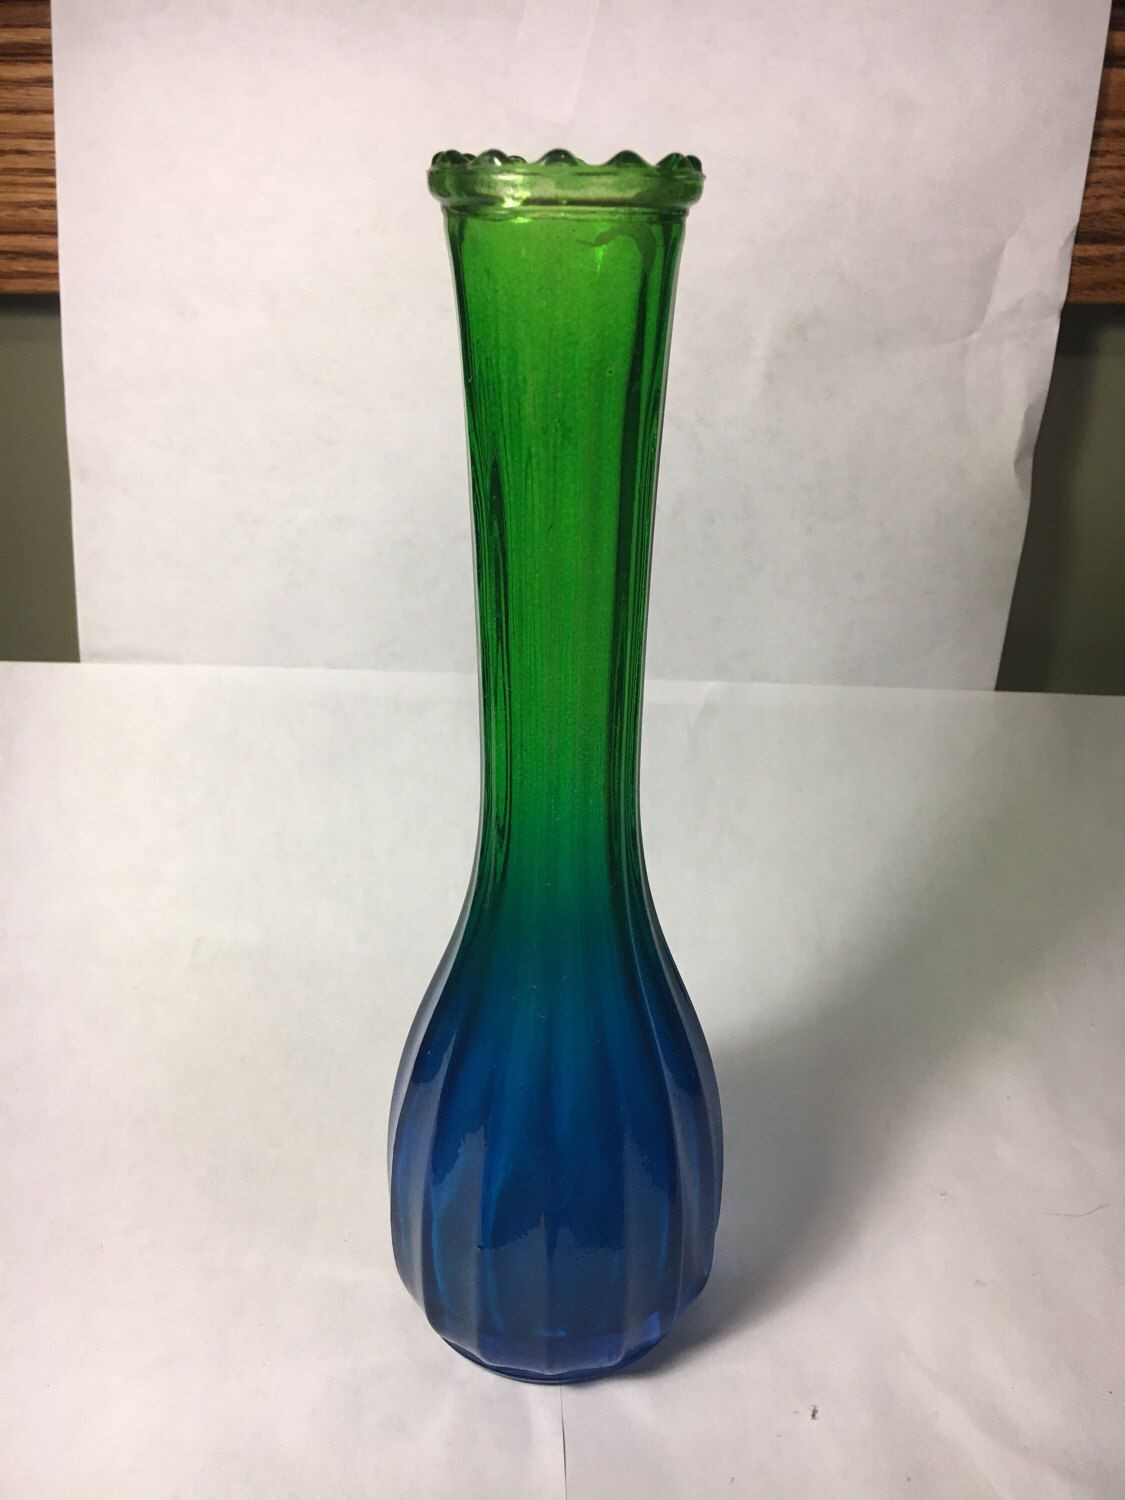 13 Lovable Vintage Czech Glass Vase 2024 free download vintage czech glass vase of collectible glass vases collection a personal favorite from my etsy for collectible glass vases collection a personal favorite from my etsy shop of collectible gl